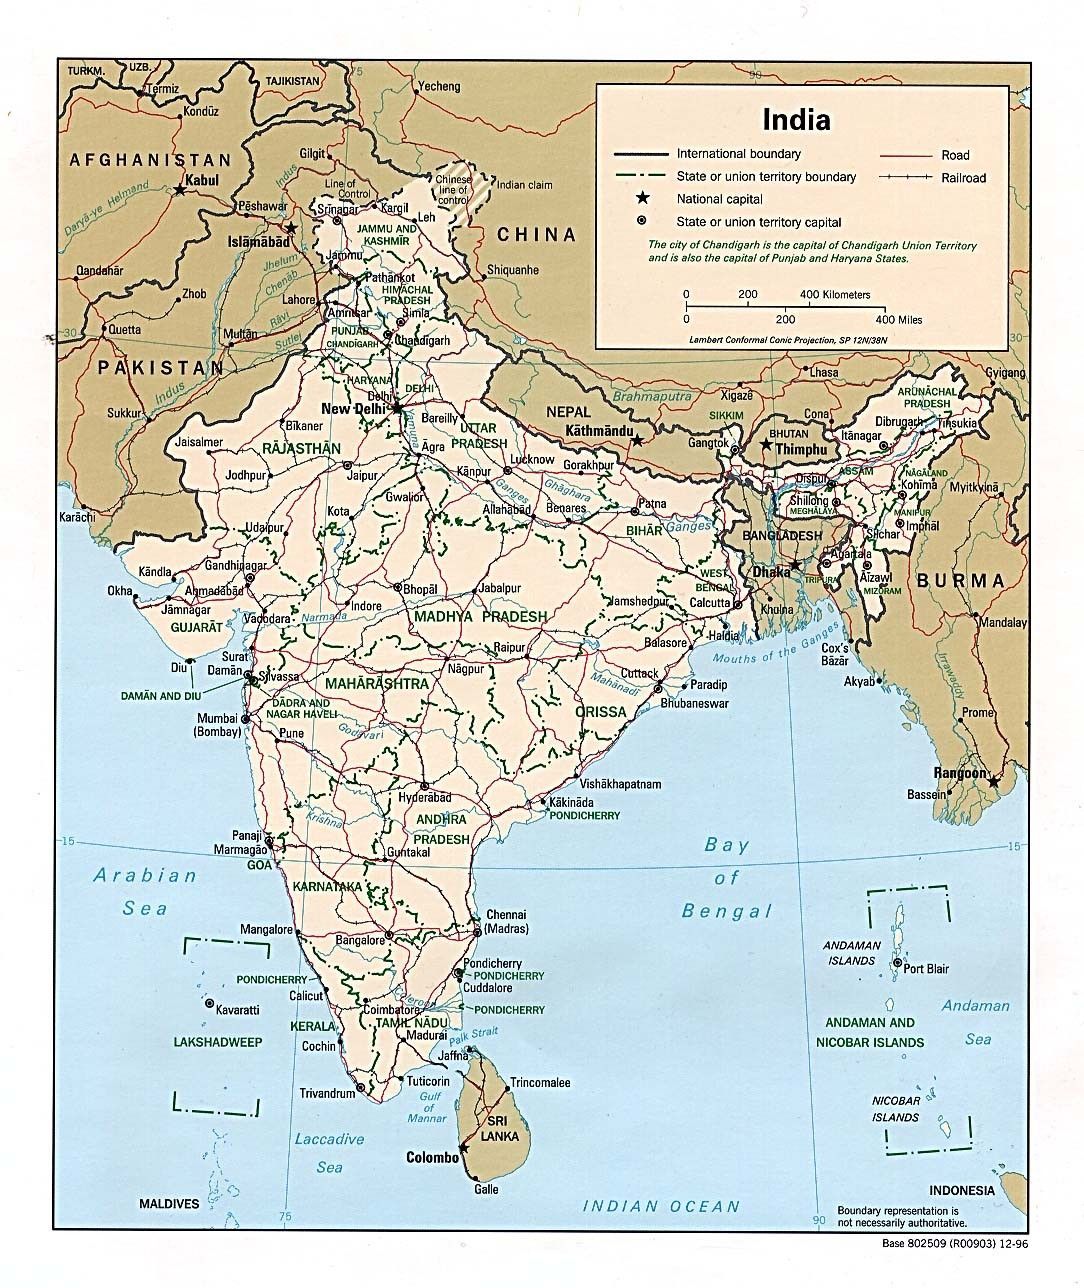 Punctilious India Map HD Free Download World Geography Map Pdf Map Of 1857 India Full Maps Of India Download Politi. India map, World geography map, Geography map